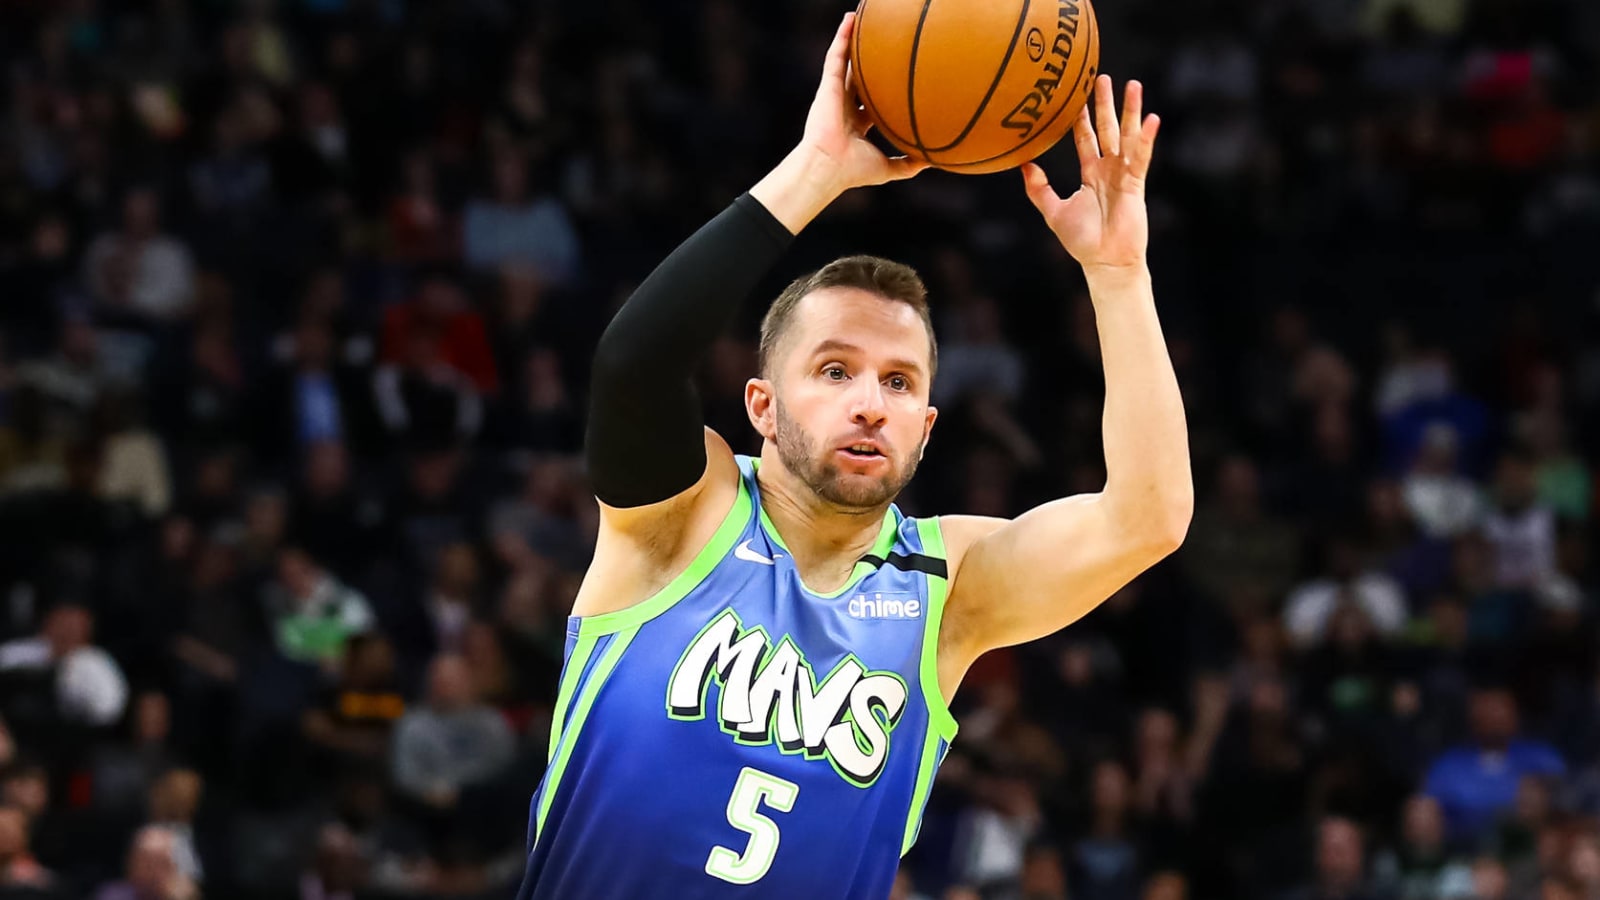 Report: J.J. Barea's contract in Spain has NBA out